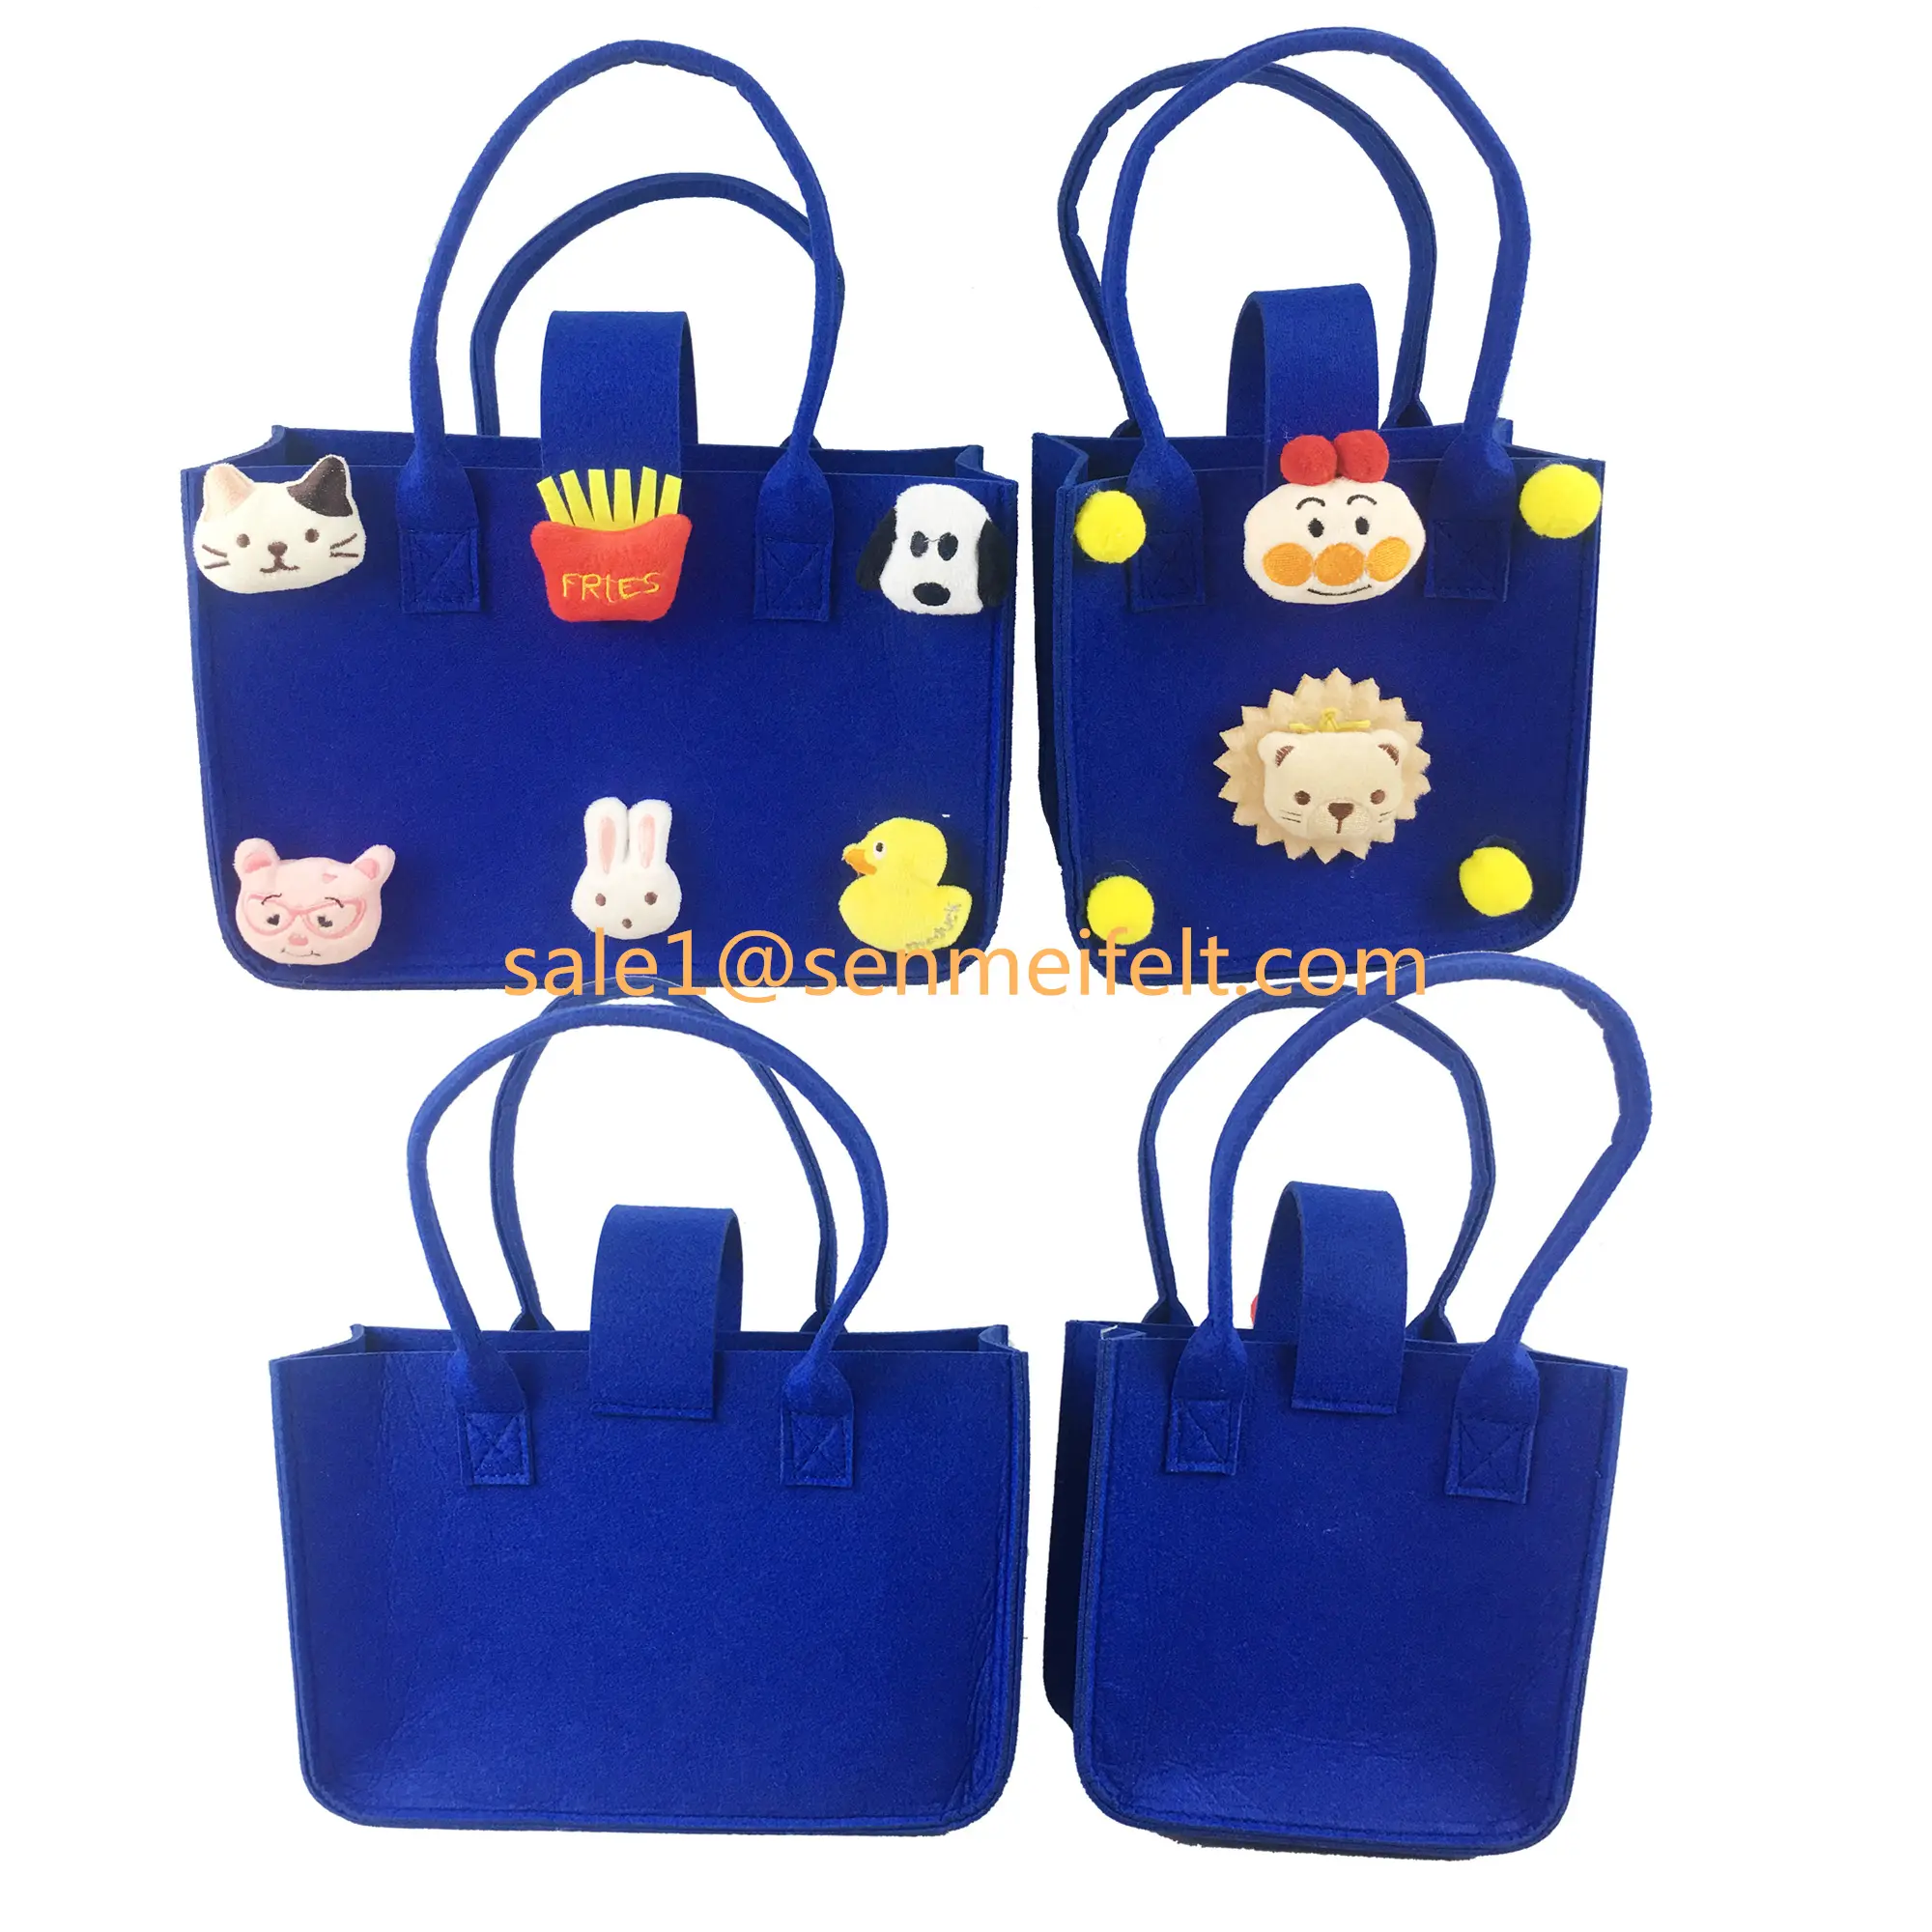 Reusable Felt Candy Handbag Treat Goody Bag Goody Bag Trick Gift Goodie Bags for Kids Birthday Themed Party Favor Candy Pouch